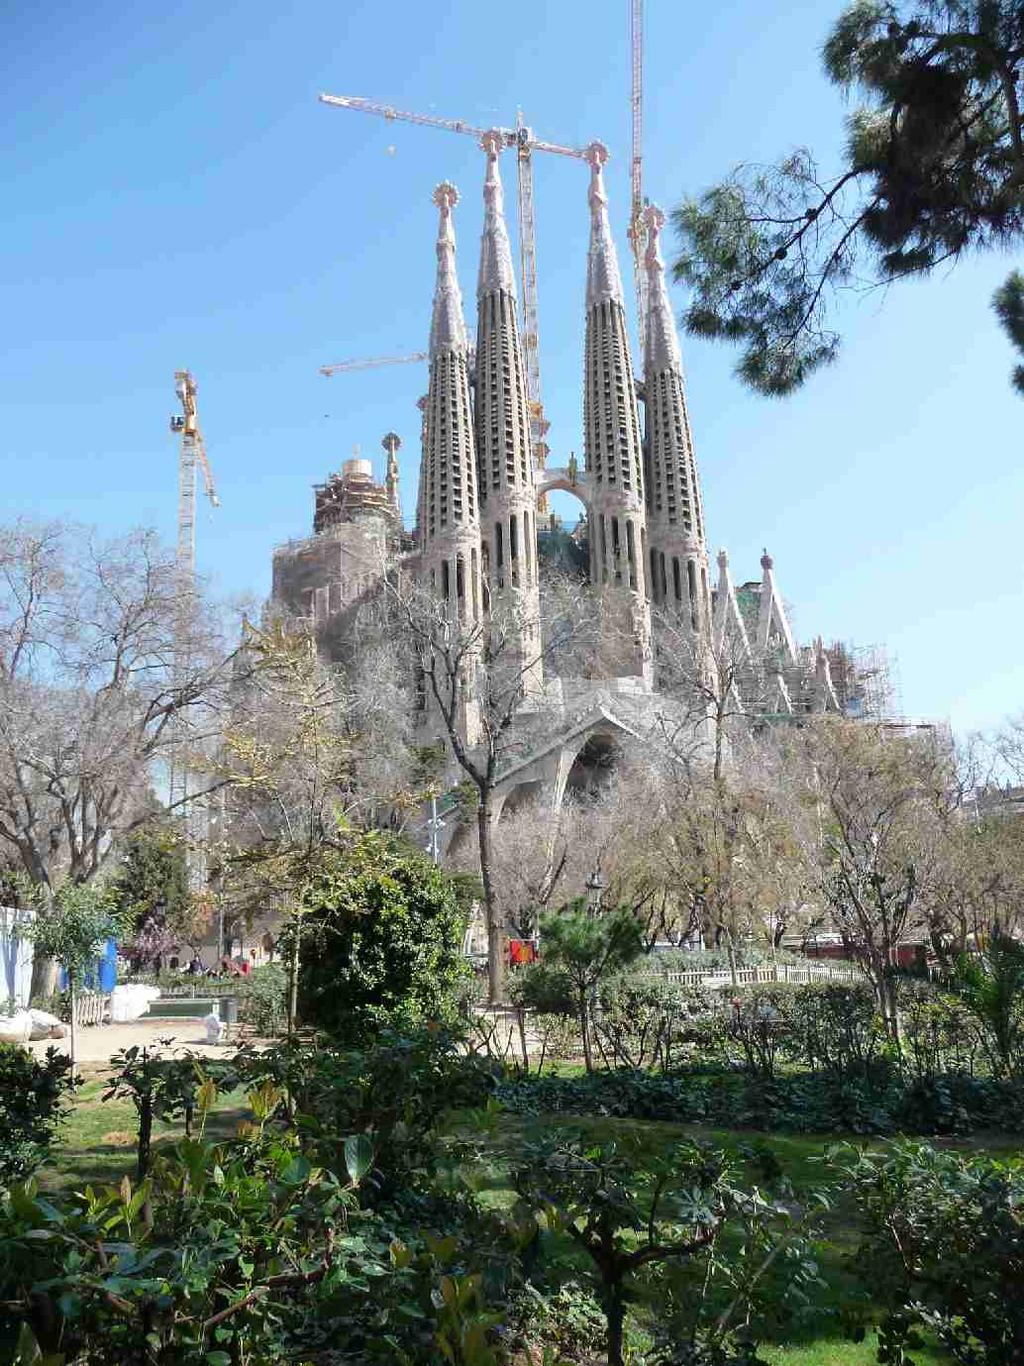 It is designed by the architect Antoni Gaudí. The building started in 1883, but it is still not finished.